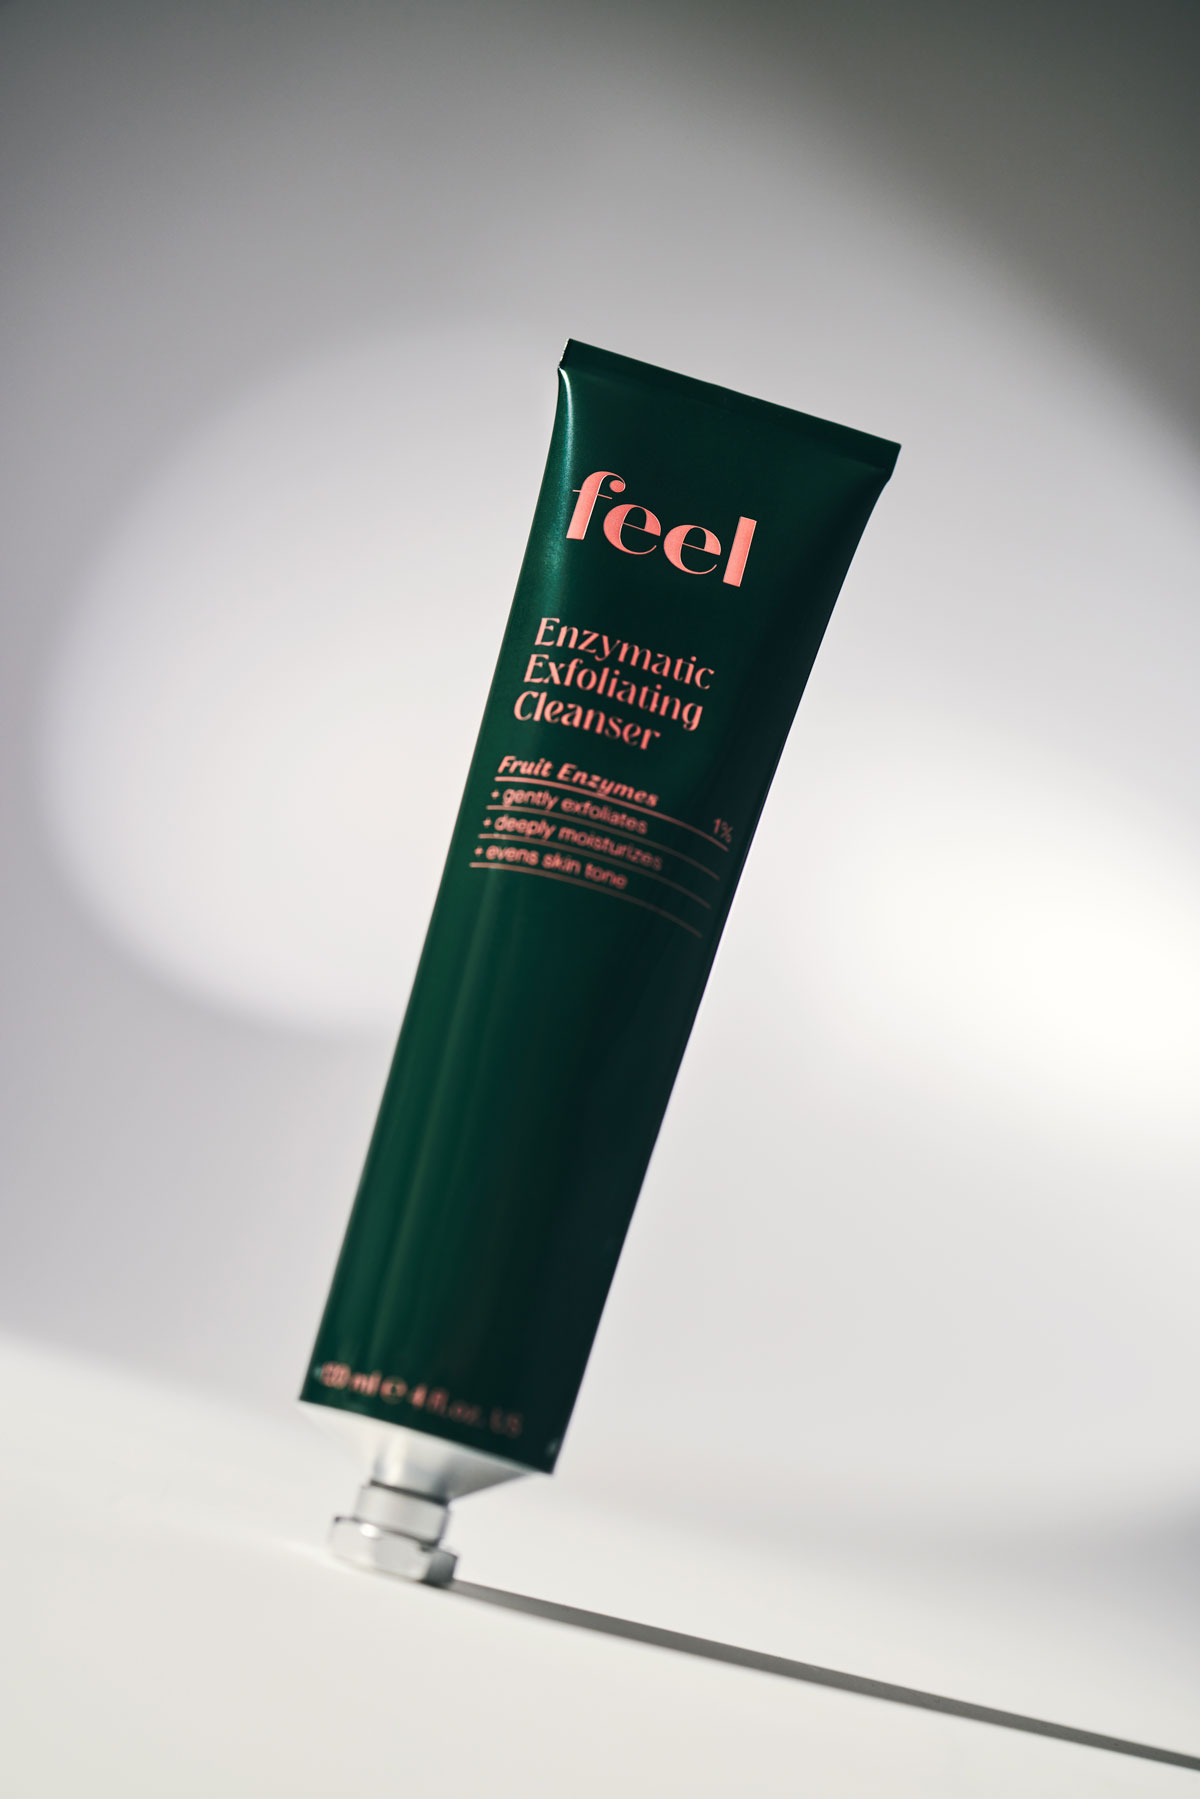 A dark green aluminum tube that says "Enzymatic Exfoliating Cleanser" stands in the centre of a grey background. The image is taken at an angle.